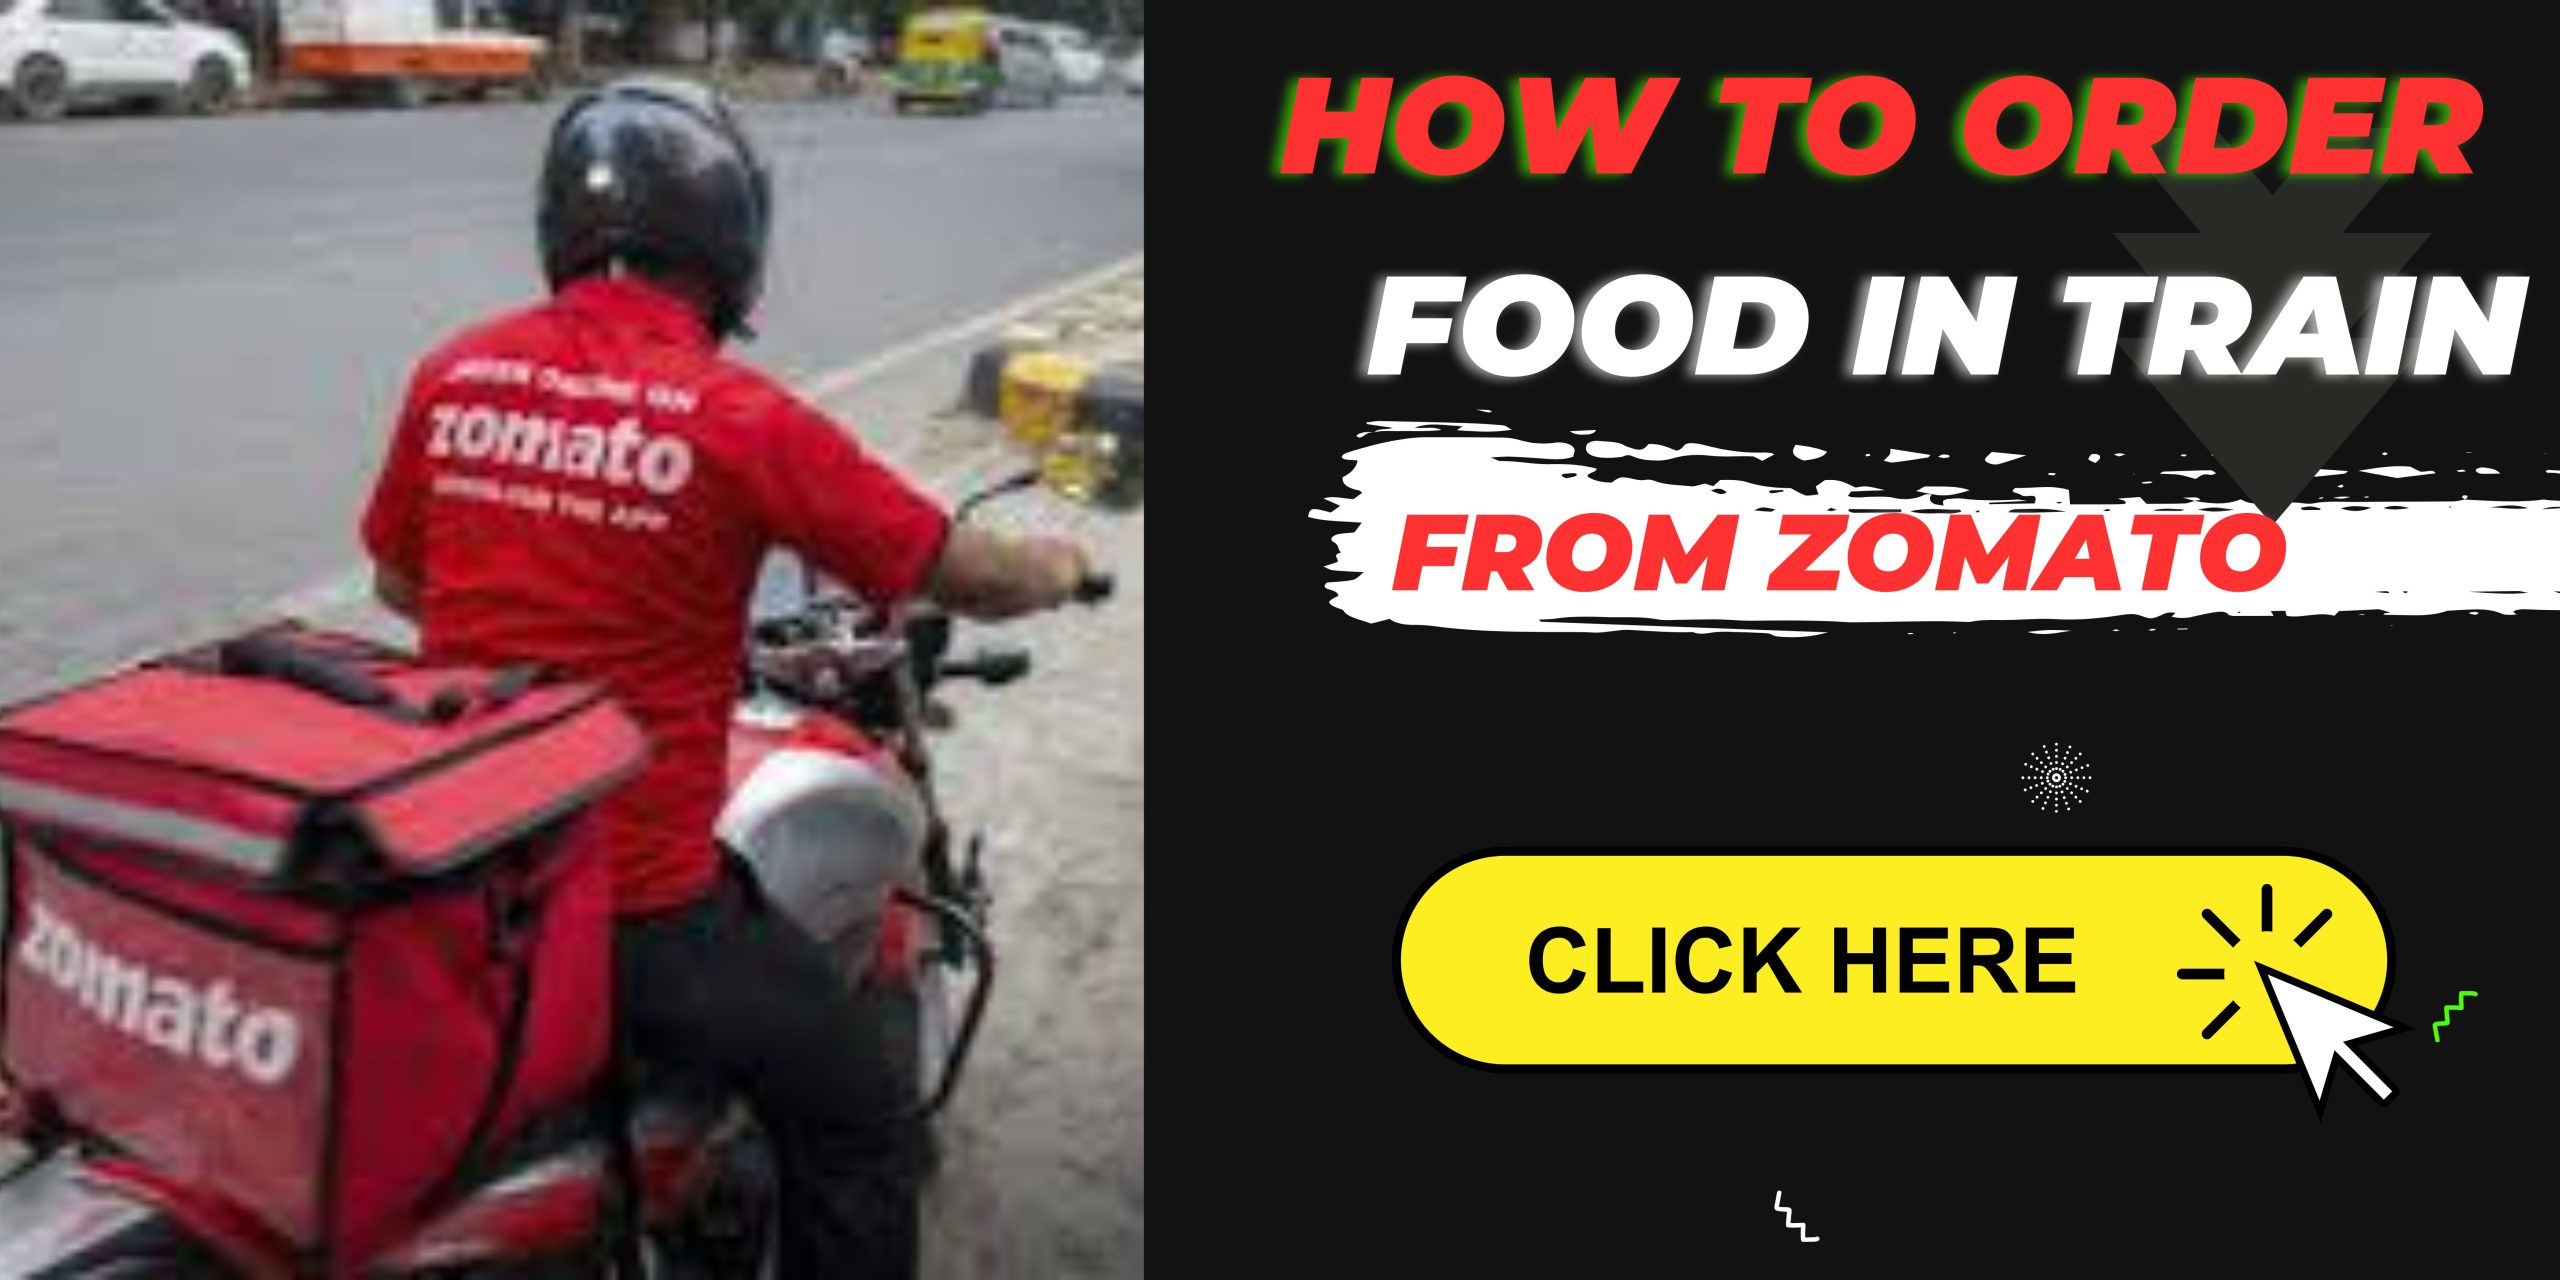 how to order food in train from Zomato